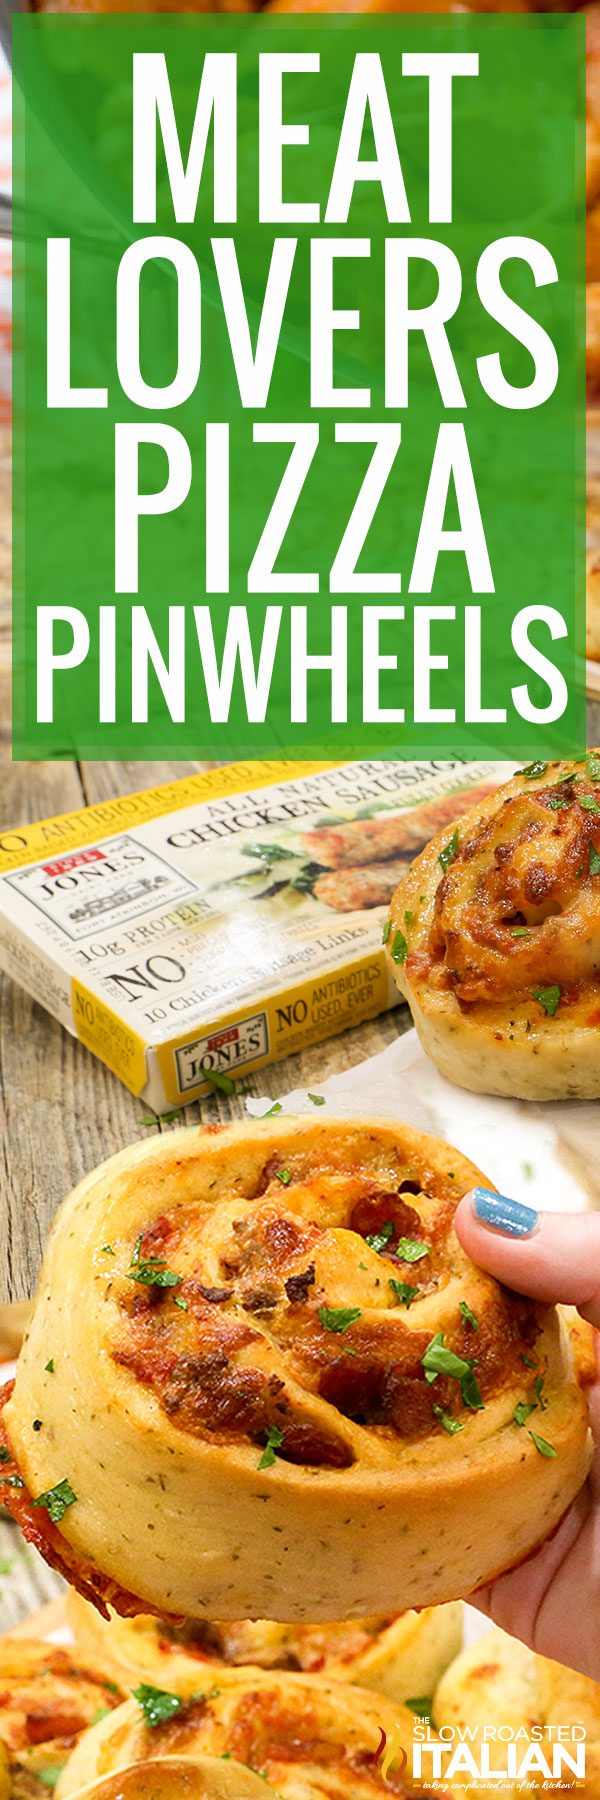 titled image (and shown): meat lovers pizza pinwheels